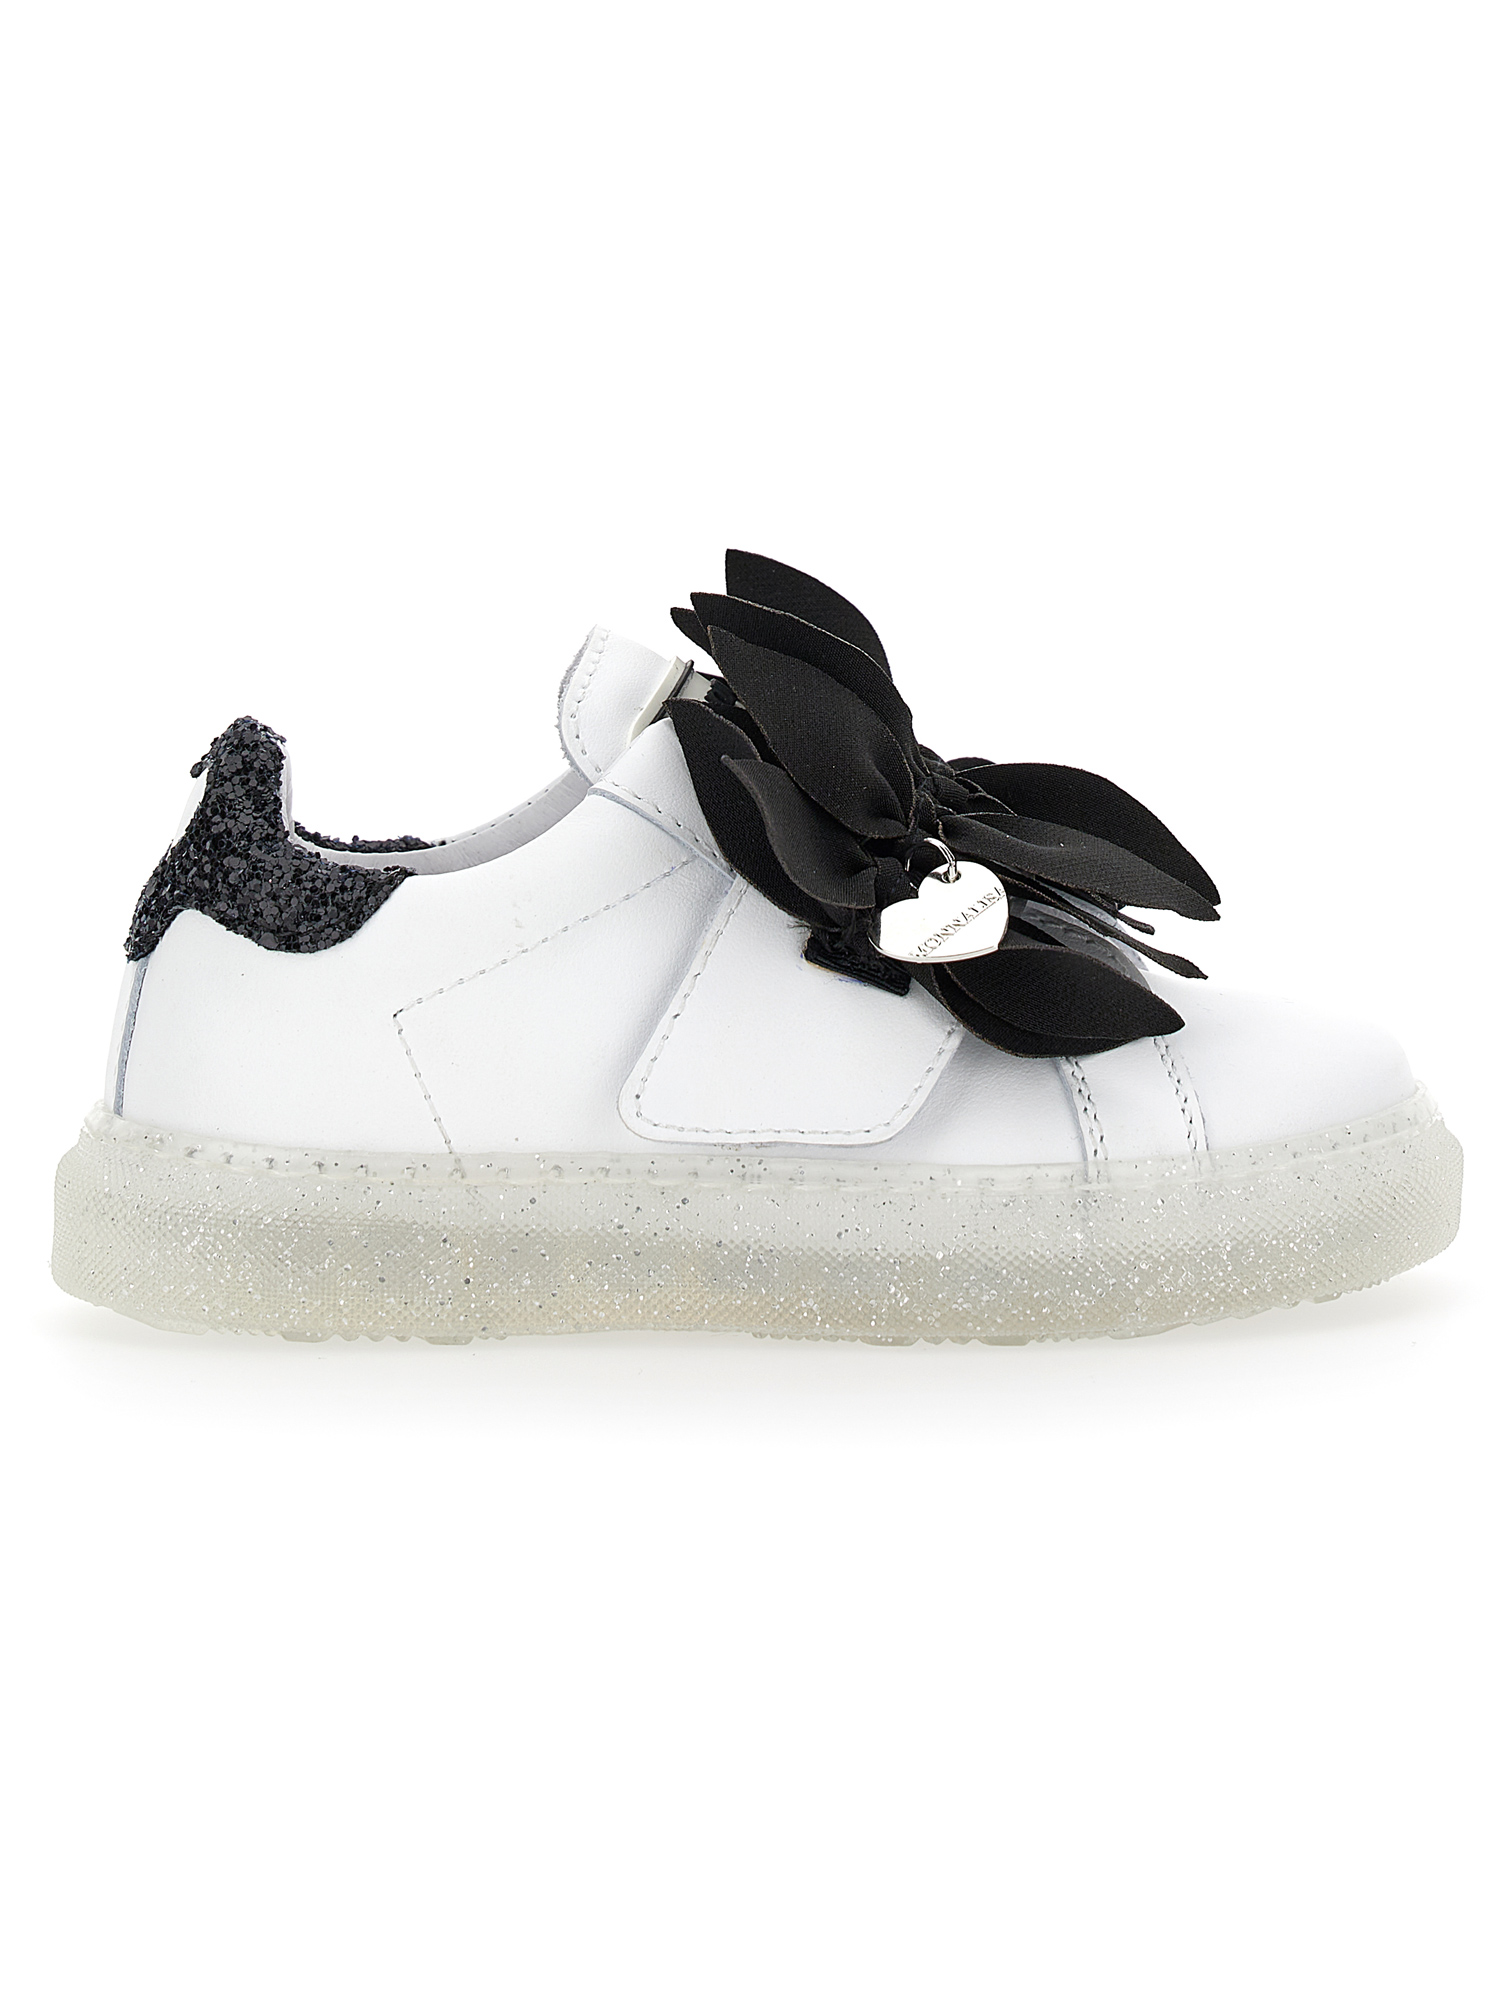 Monnalisa Leather Sneakers With Petals In Cream + Black